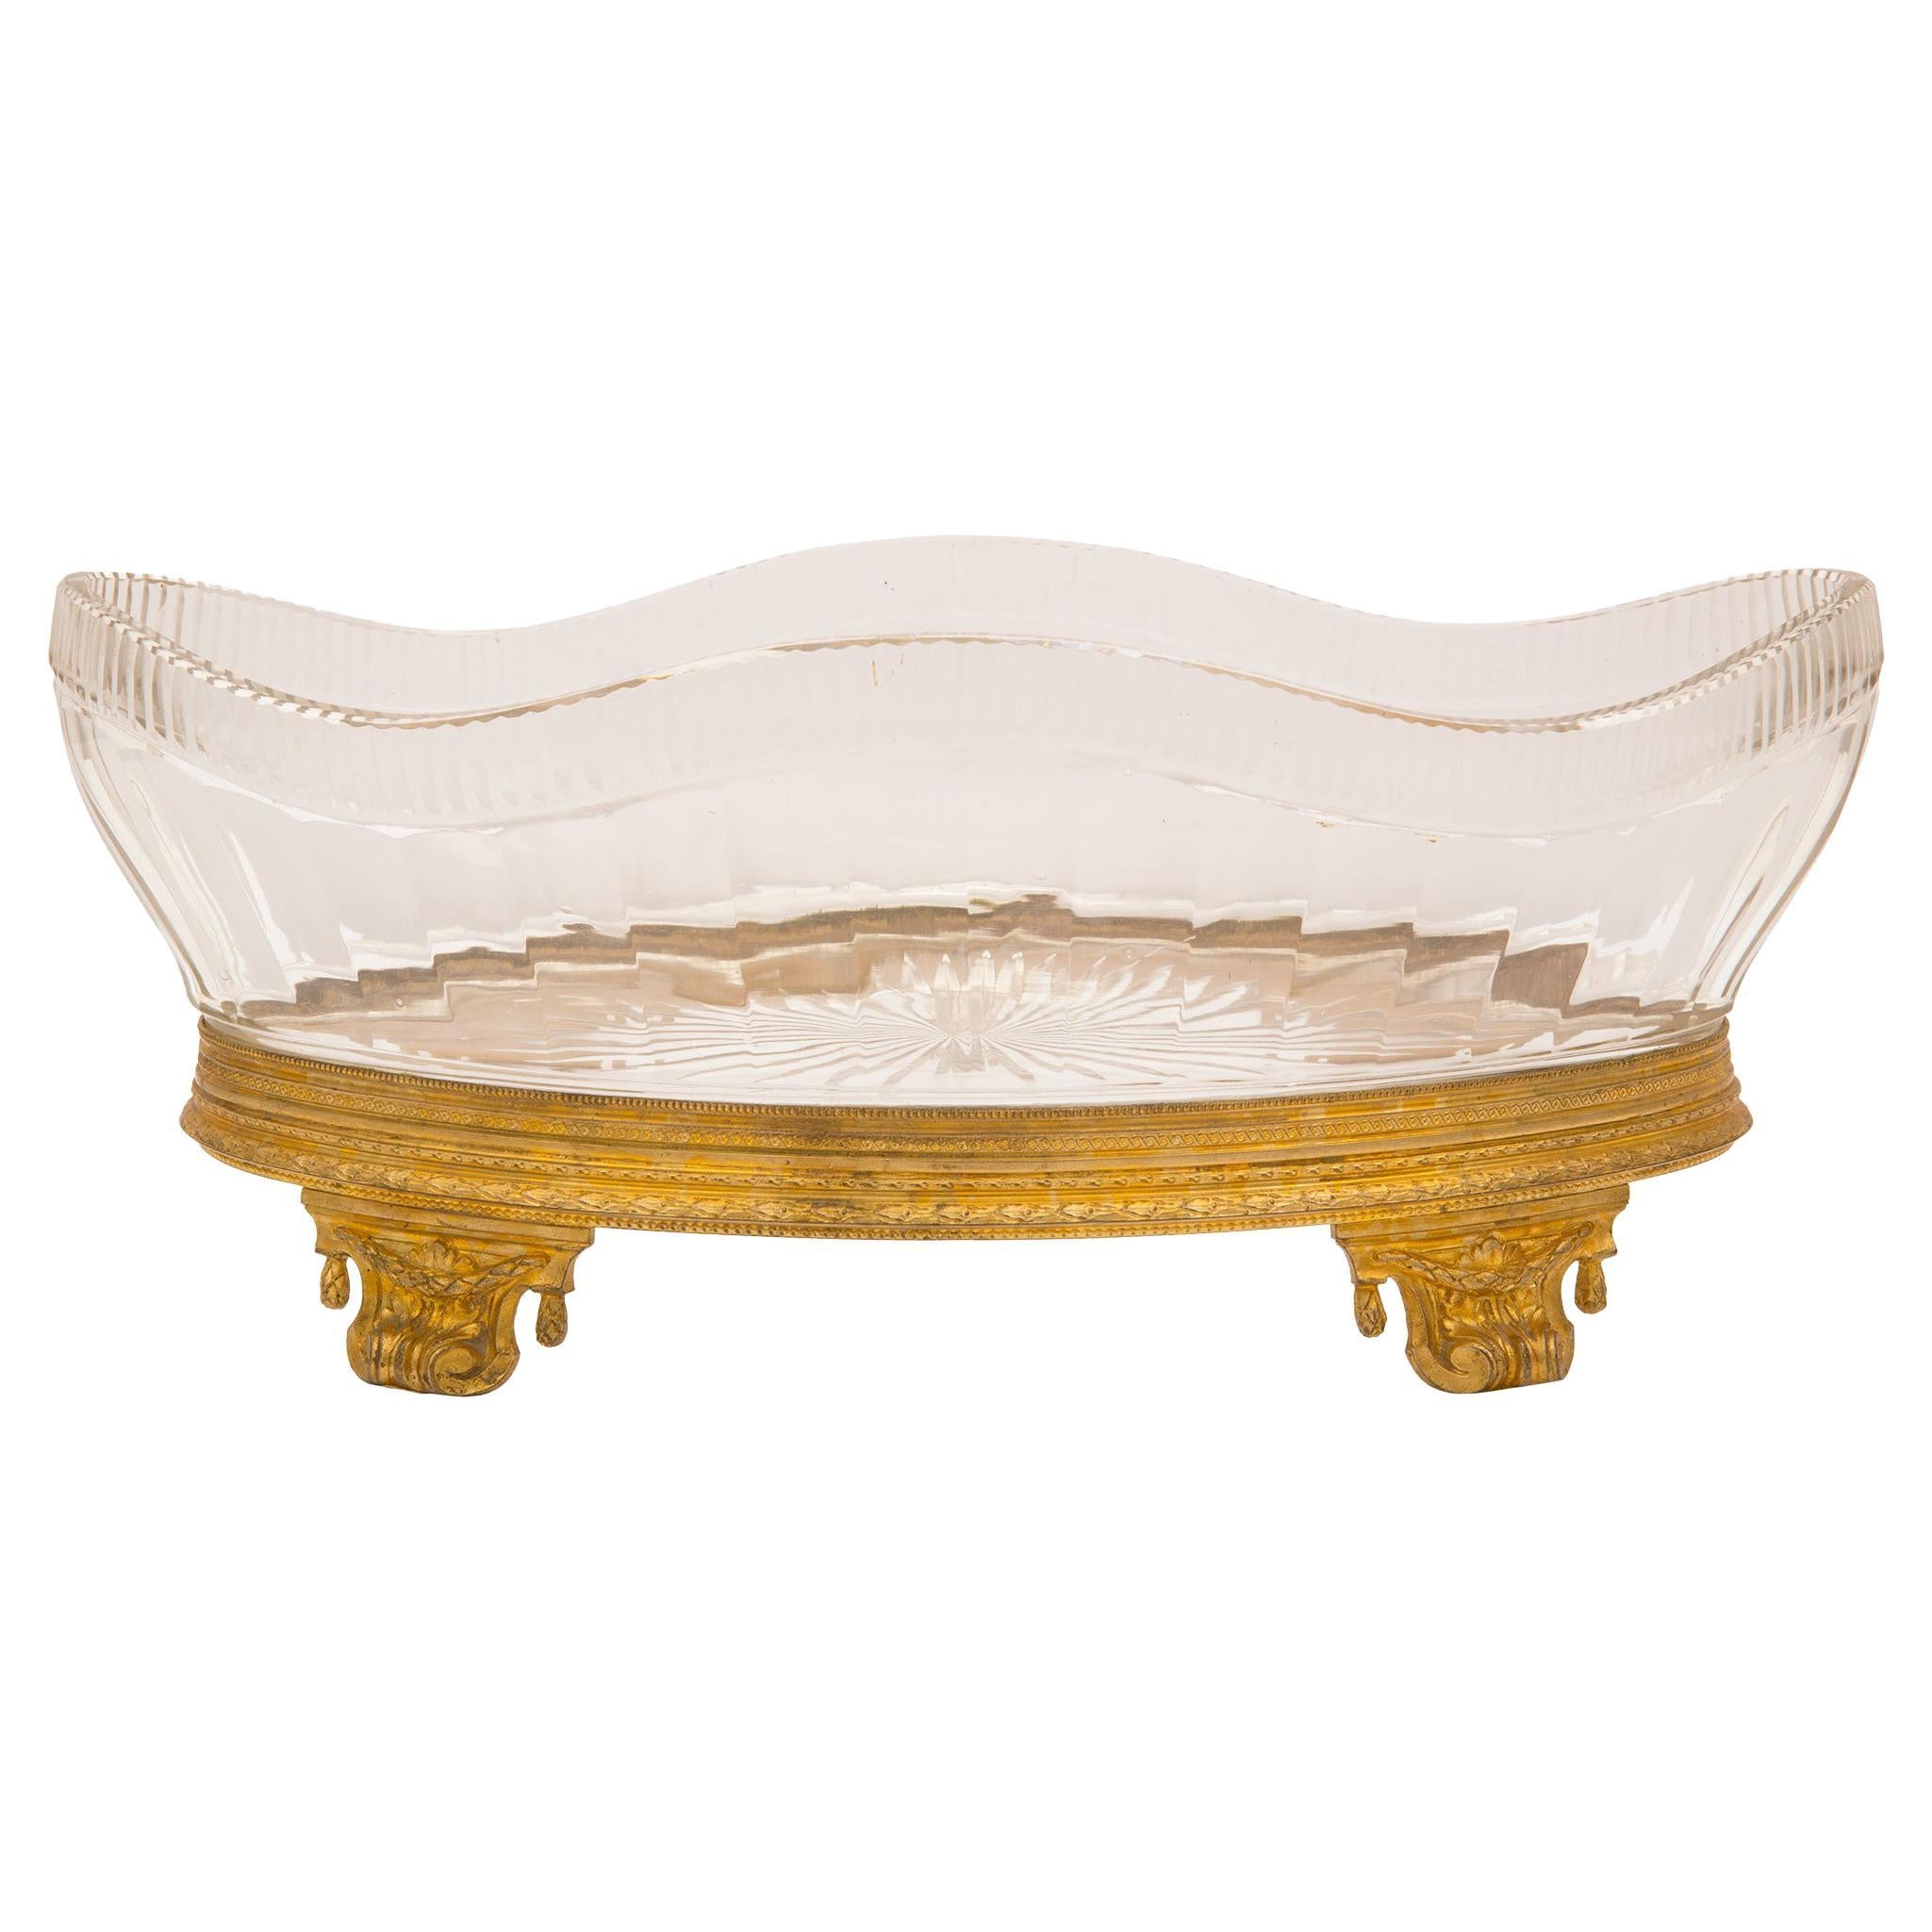 French 19th Century Louis XVI Style Oval Shaped Centerpiece Bowl For Sale